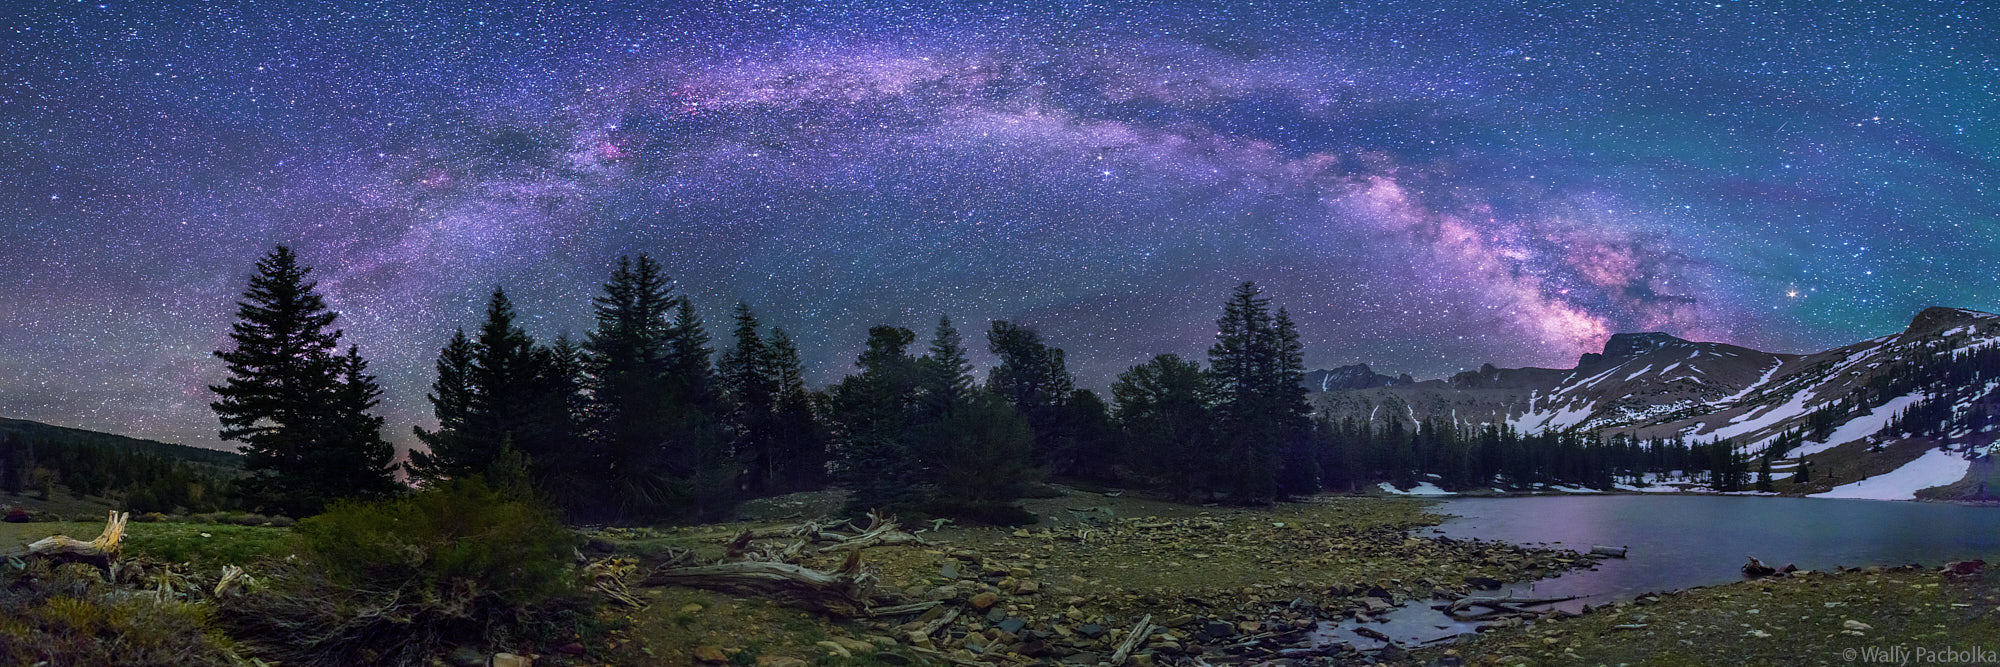 The arch of the Milky Way reaches down to touch Stella Lake in Great Basin National Park.